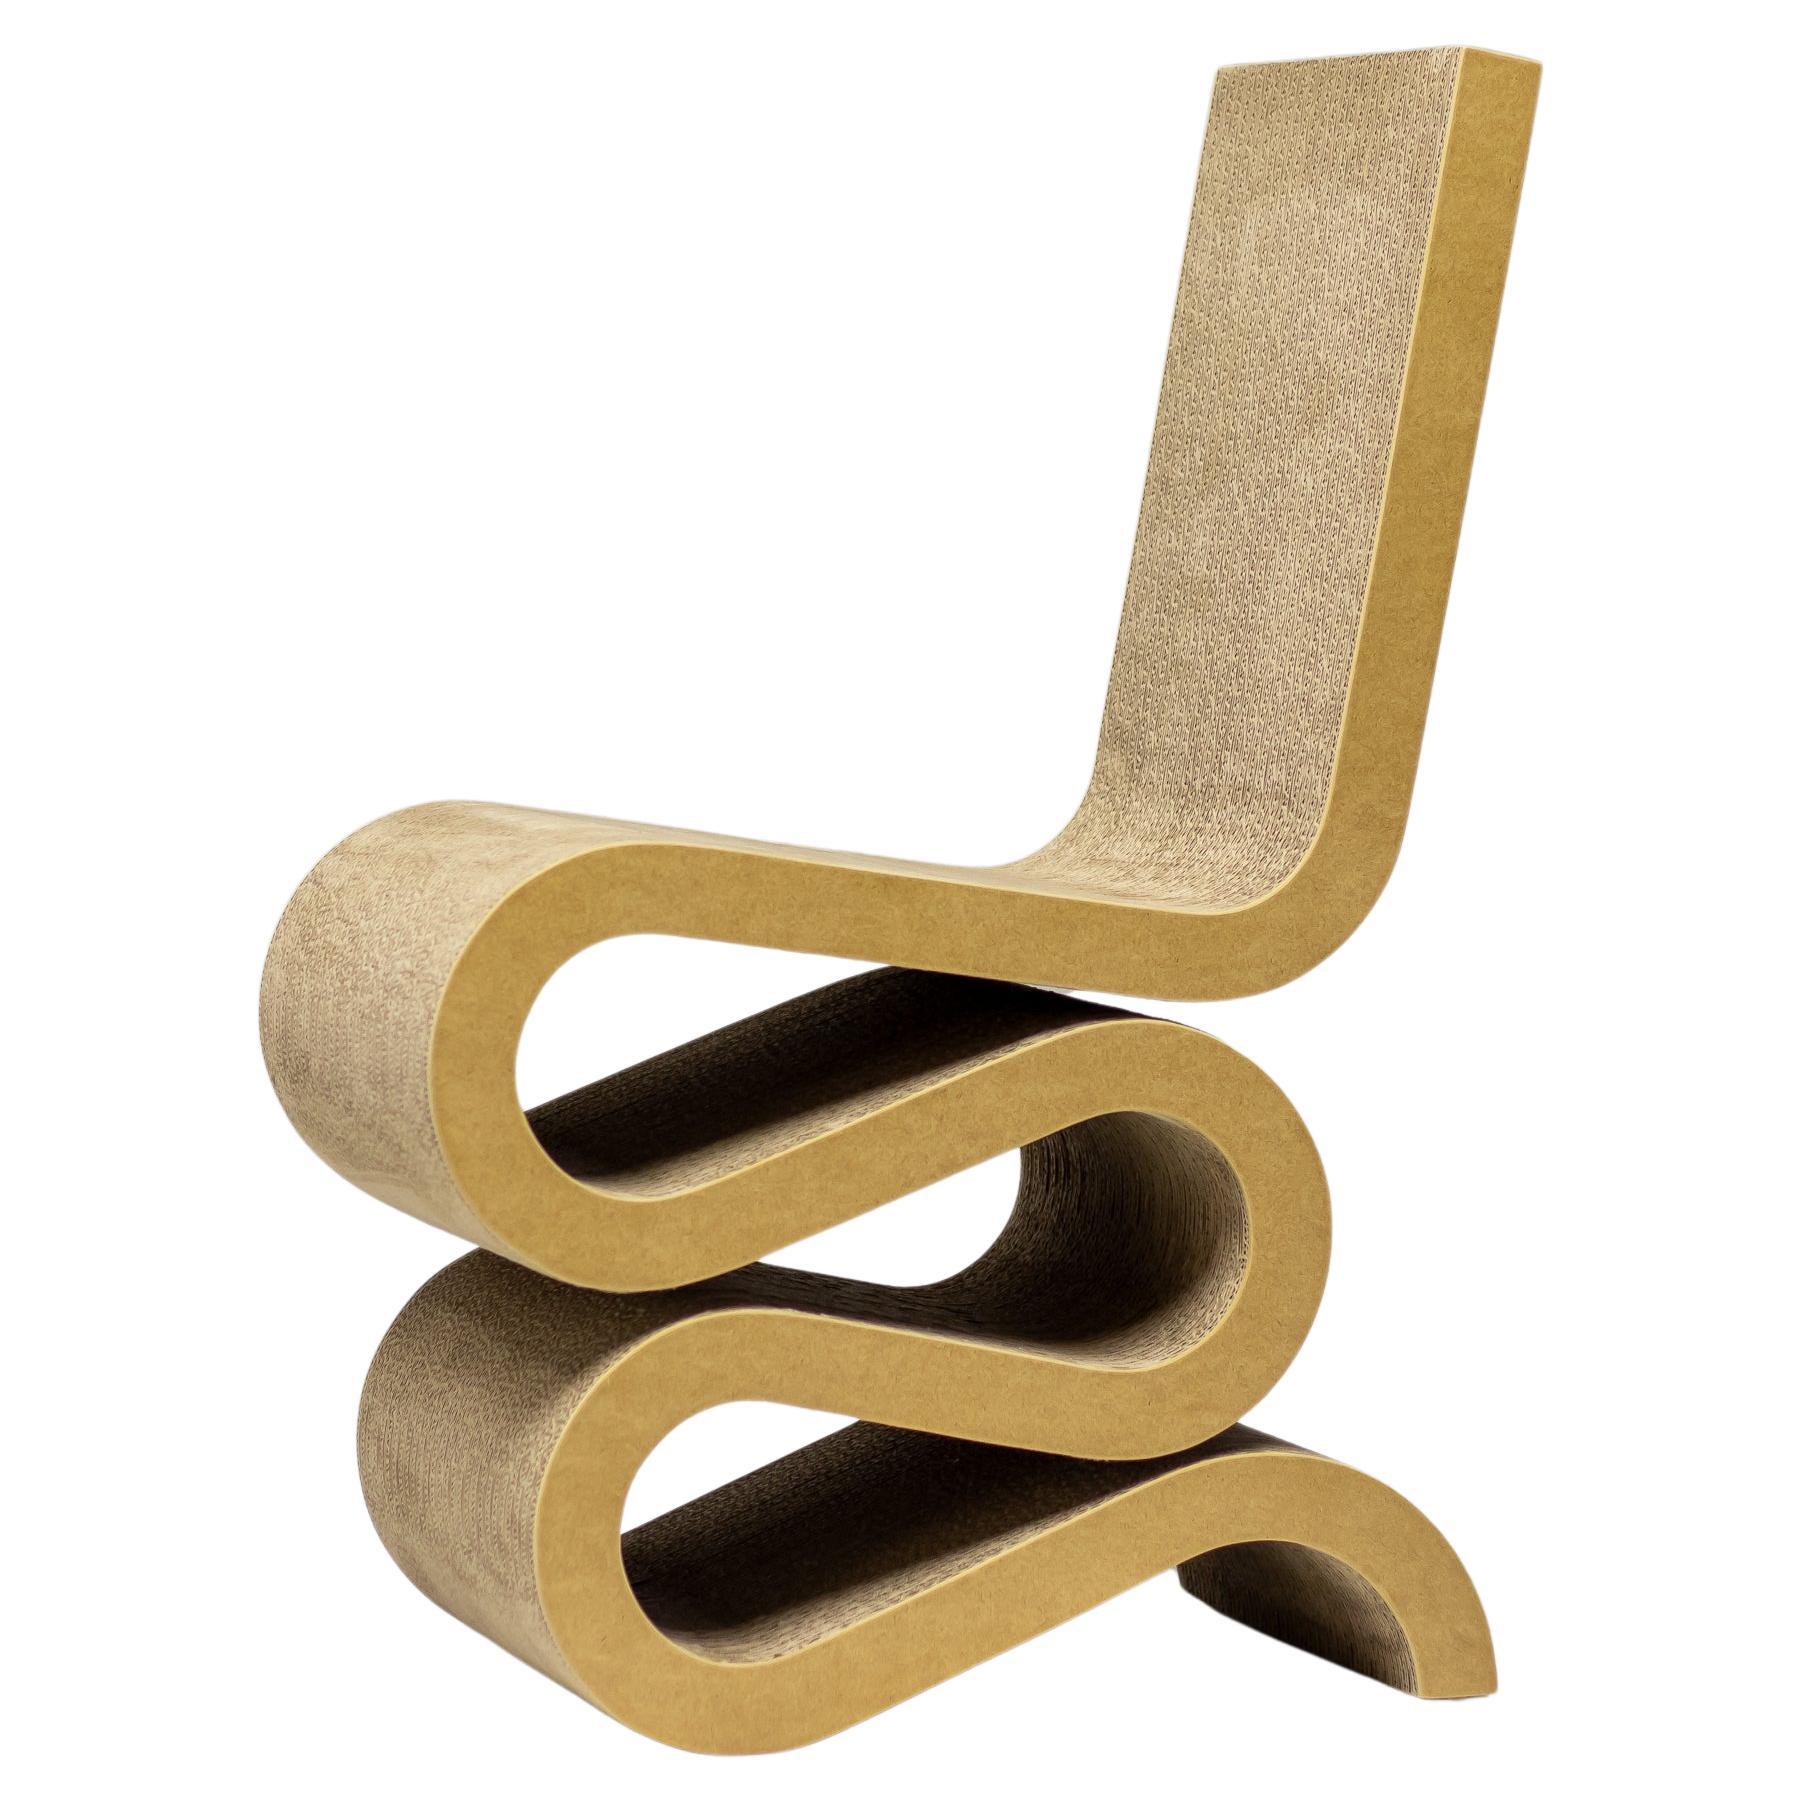 Frank Gehry "Easy Edges" Wiggle Side Chair